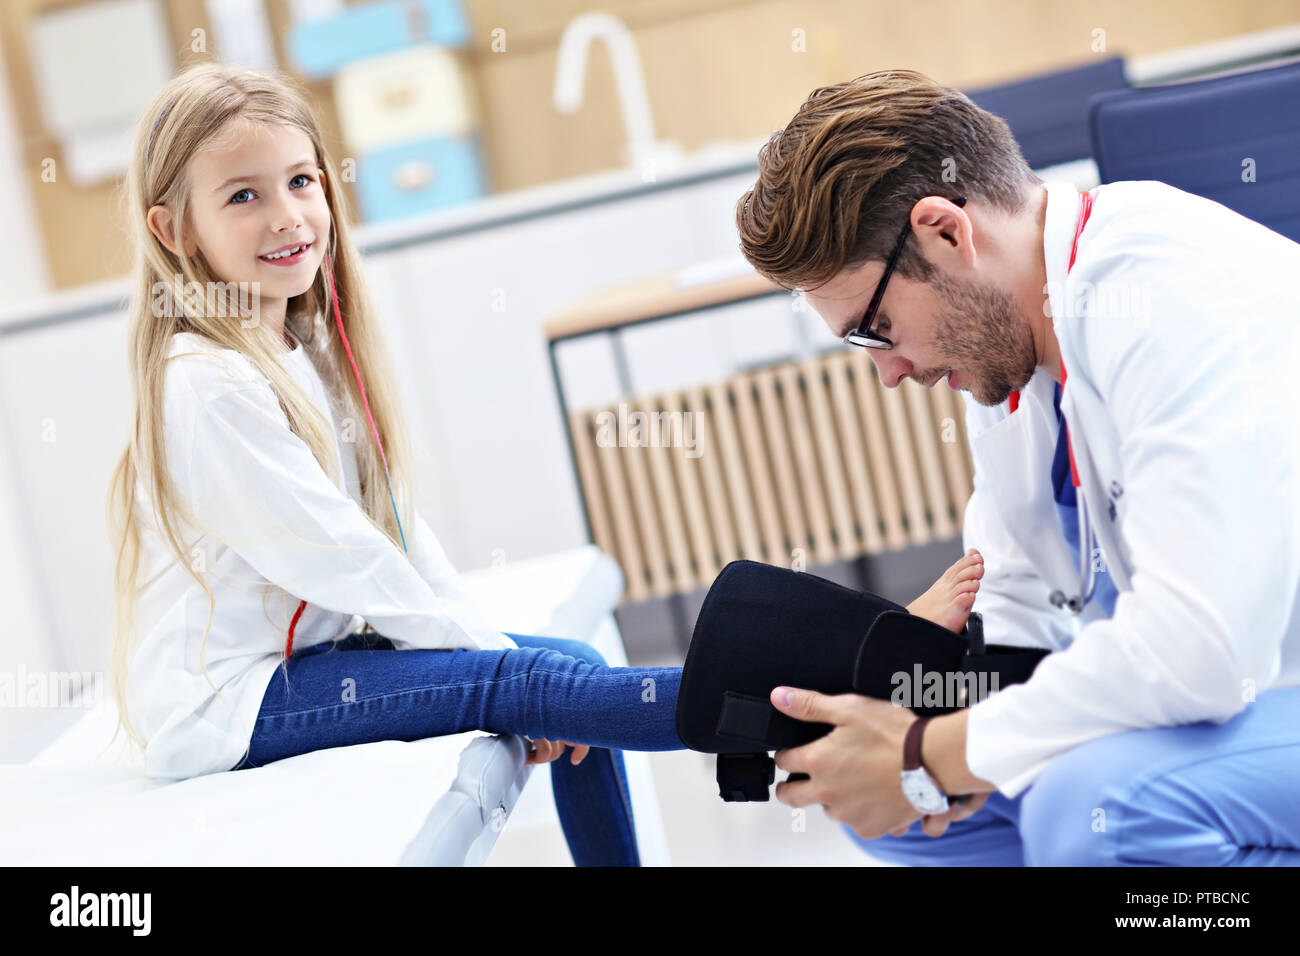 Picture showing little girl in clinic being examined by orthopaedist Stock Photo